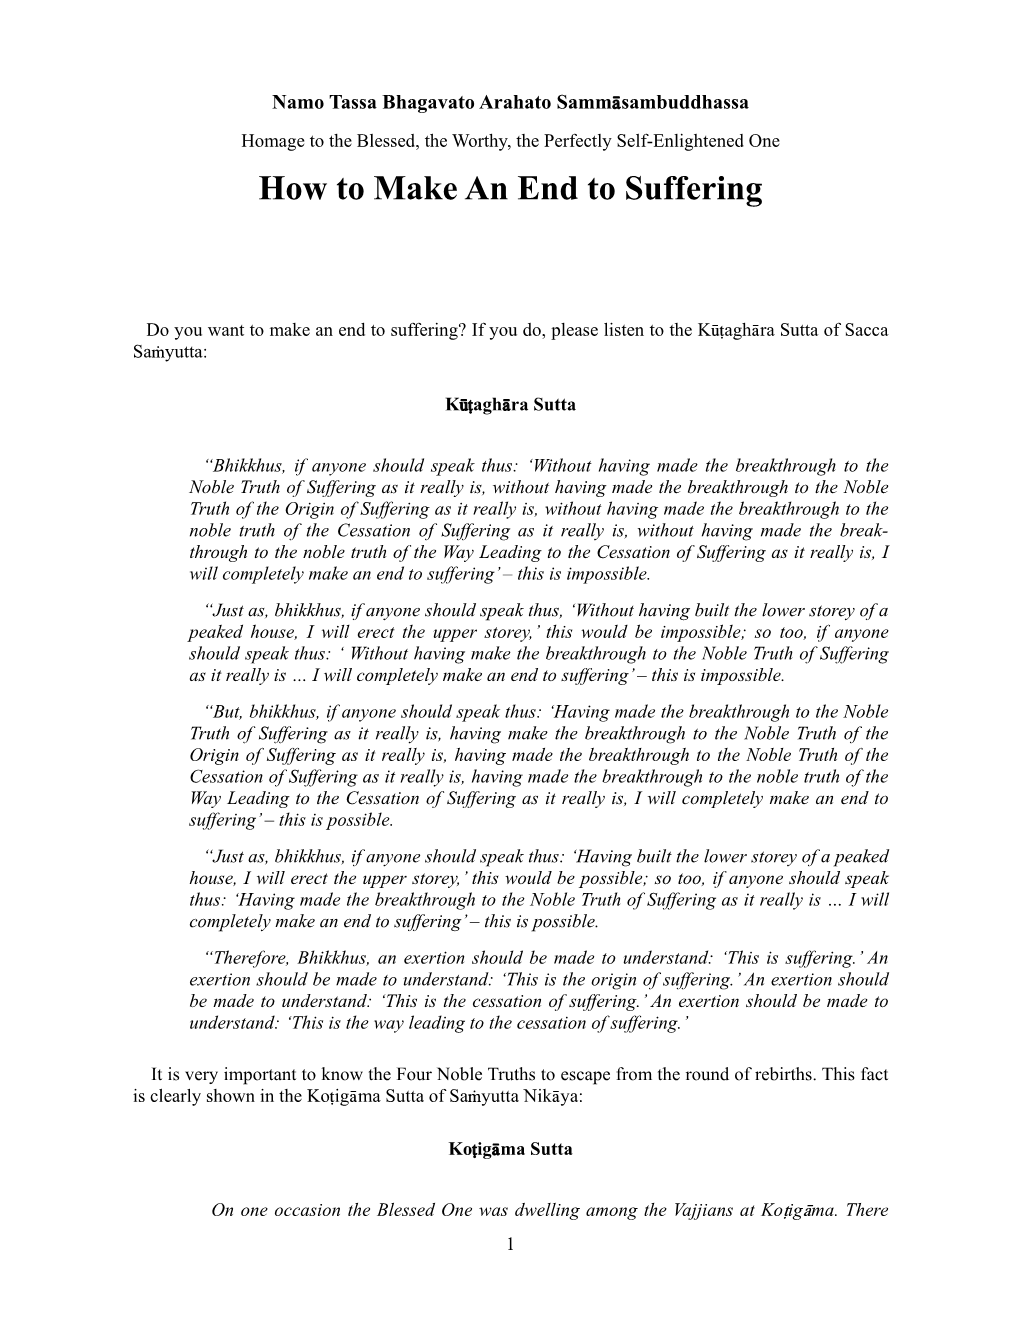 How to Make an End to Suffering